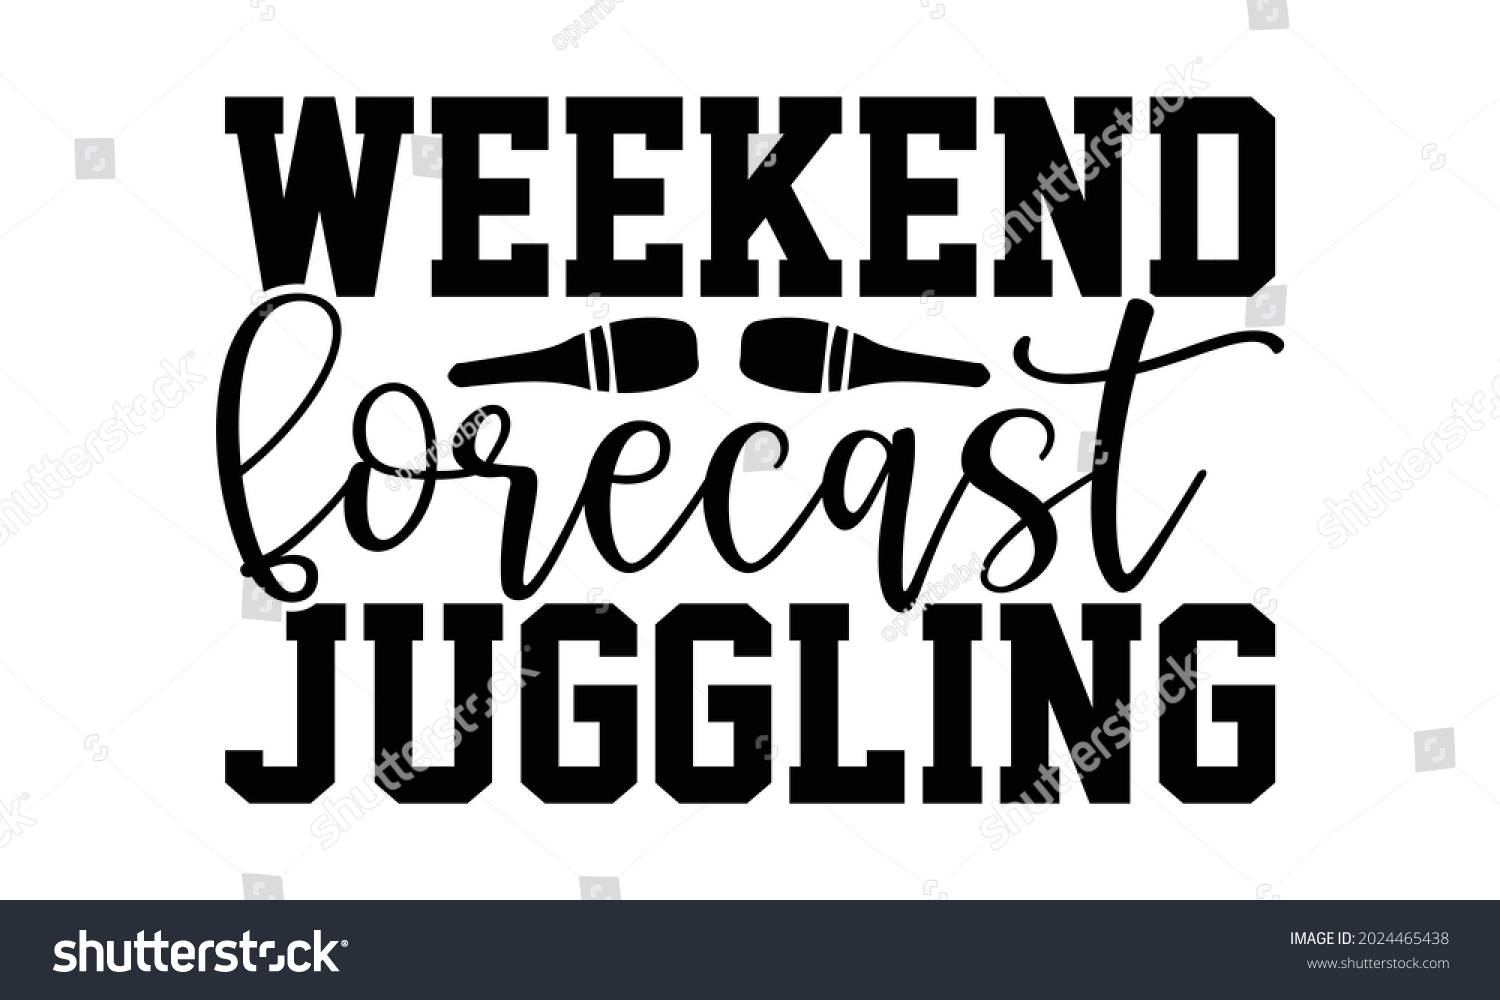 SVG of Weekend forecast juggling- Juggling t shirts design, Hand drawn lettering phrase, Calligraphy t shirt design, Isolated on white background, svg Files for Cutting Cricut, Silhouette, EPS 10 svg